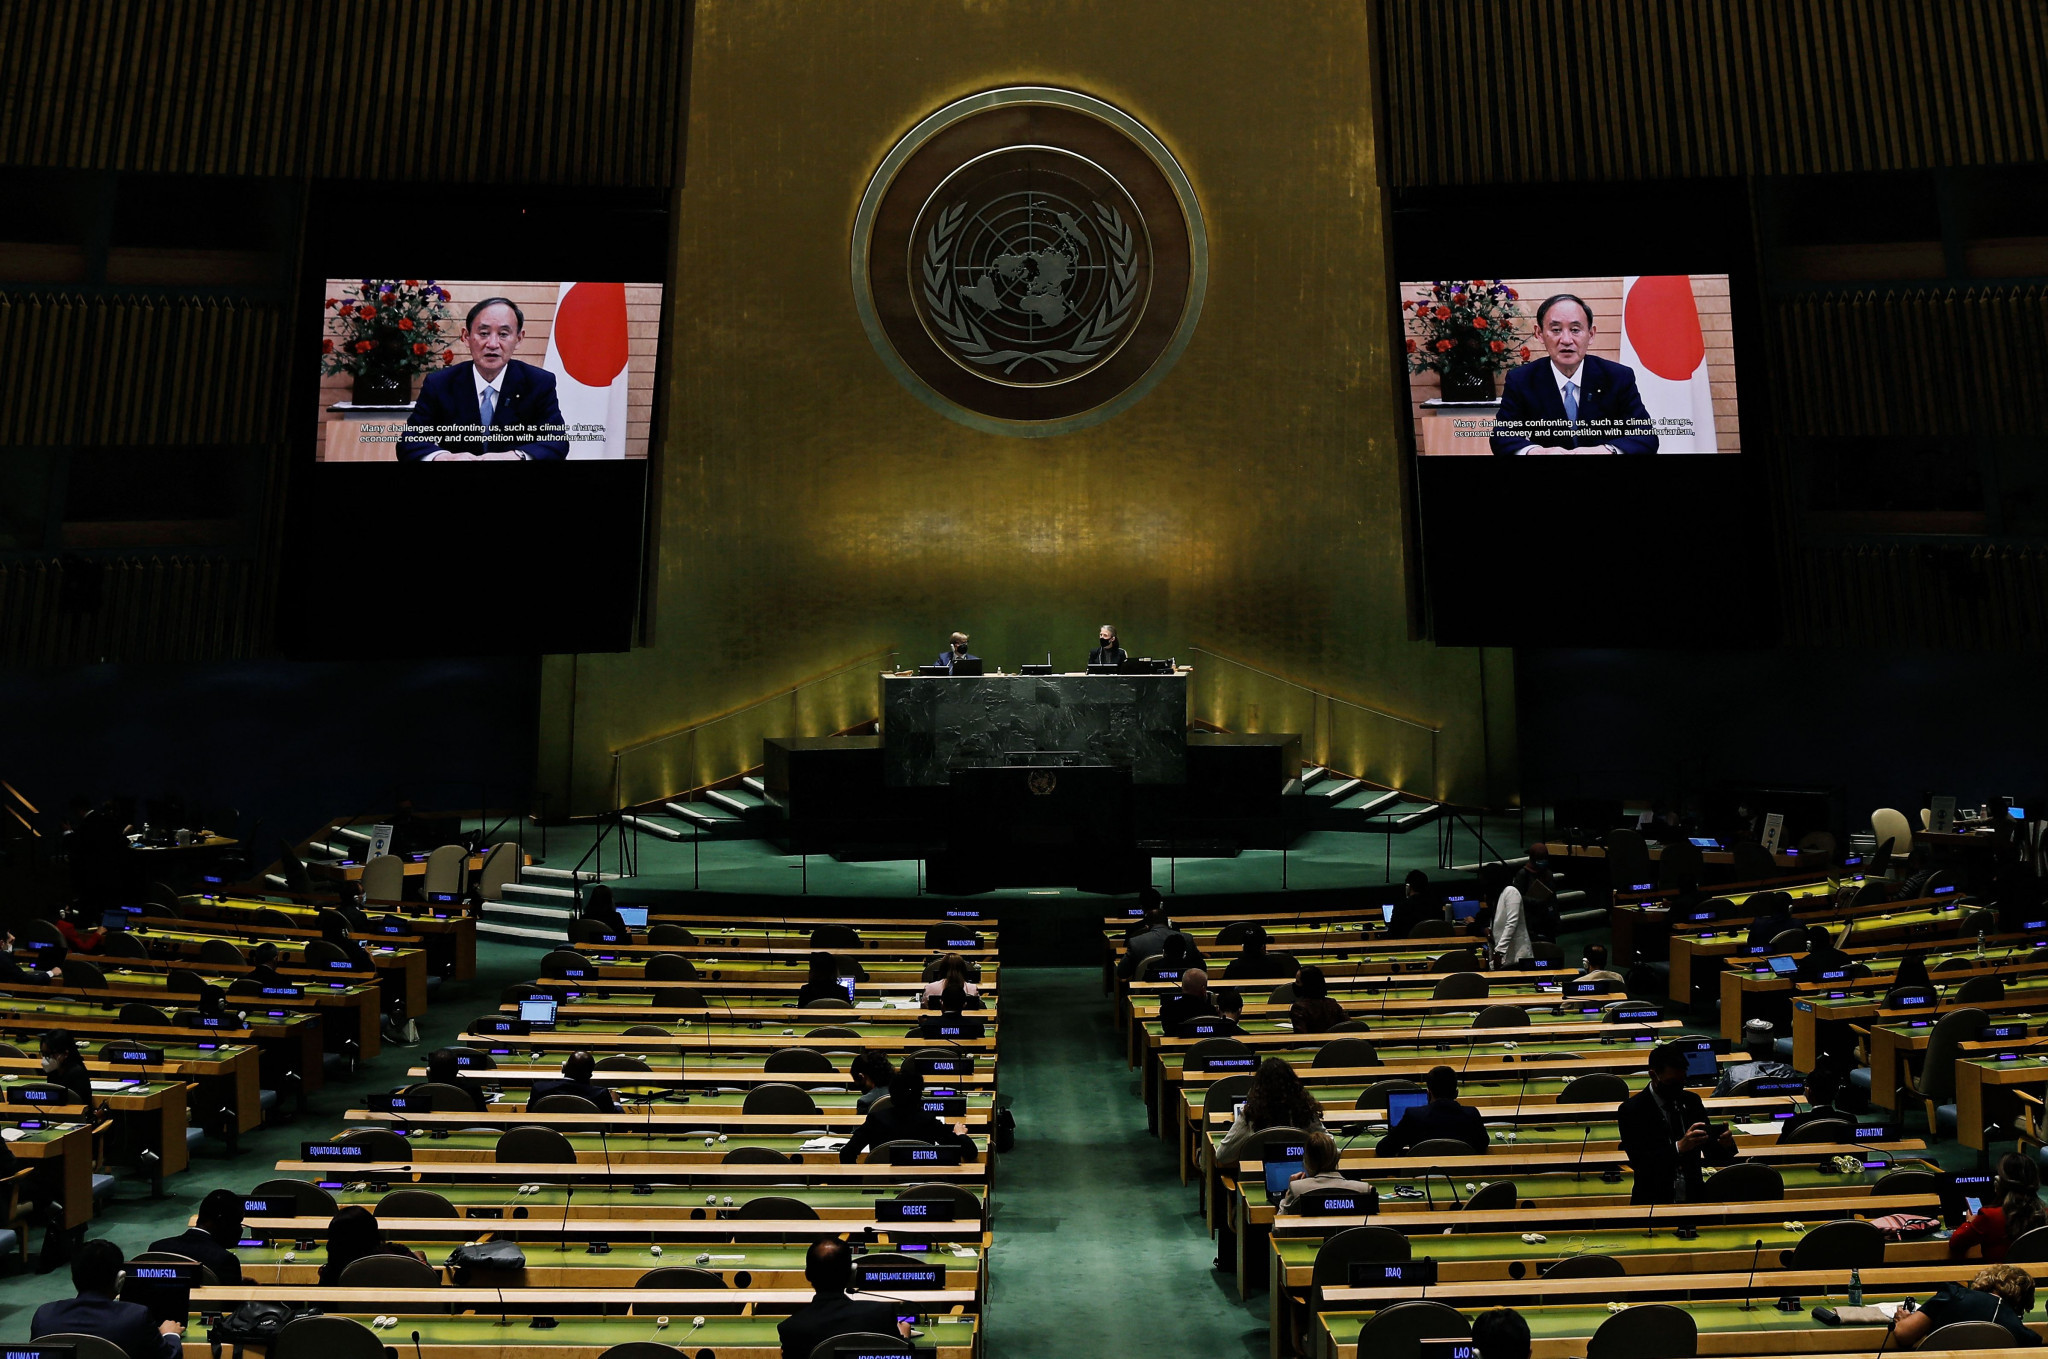 Yoshihide Suga's message was played at the UN General Assembly ©Getty Images